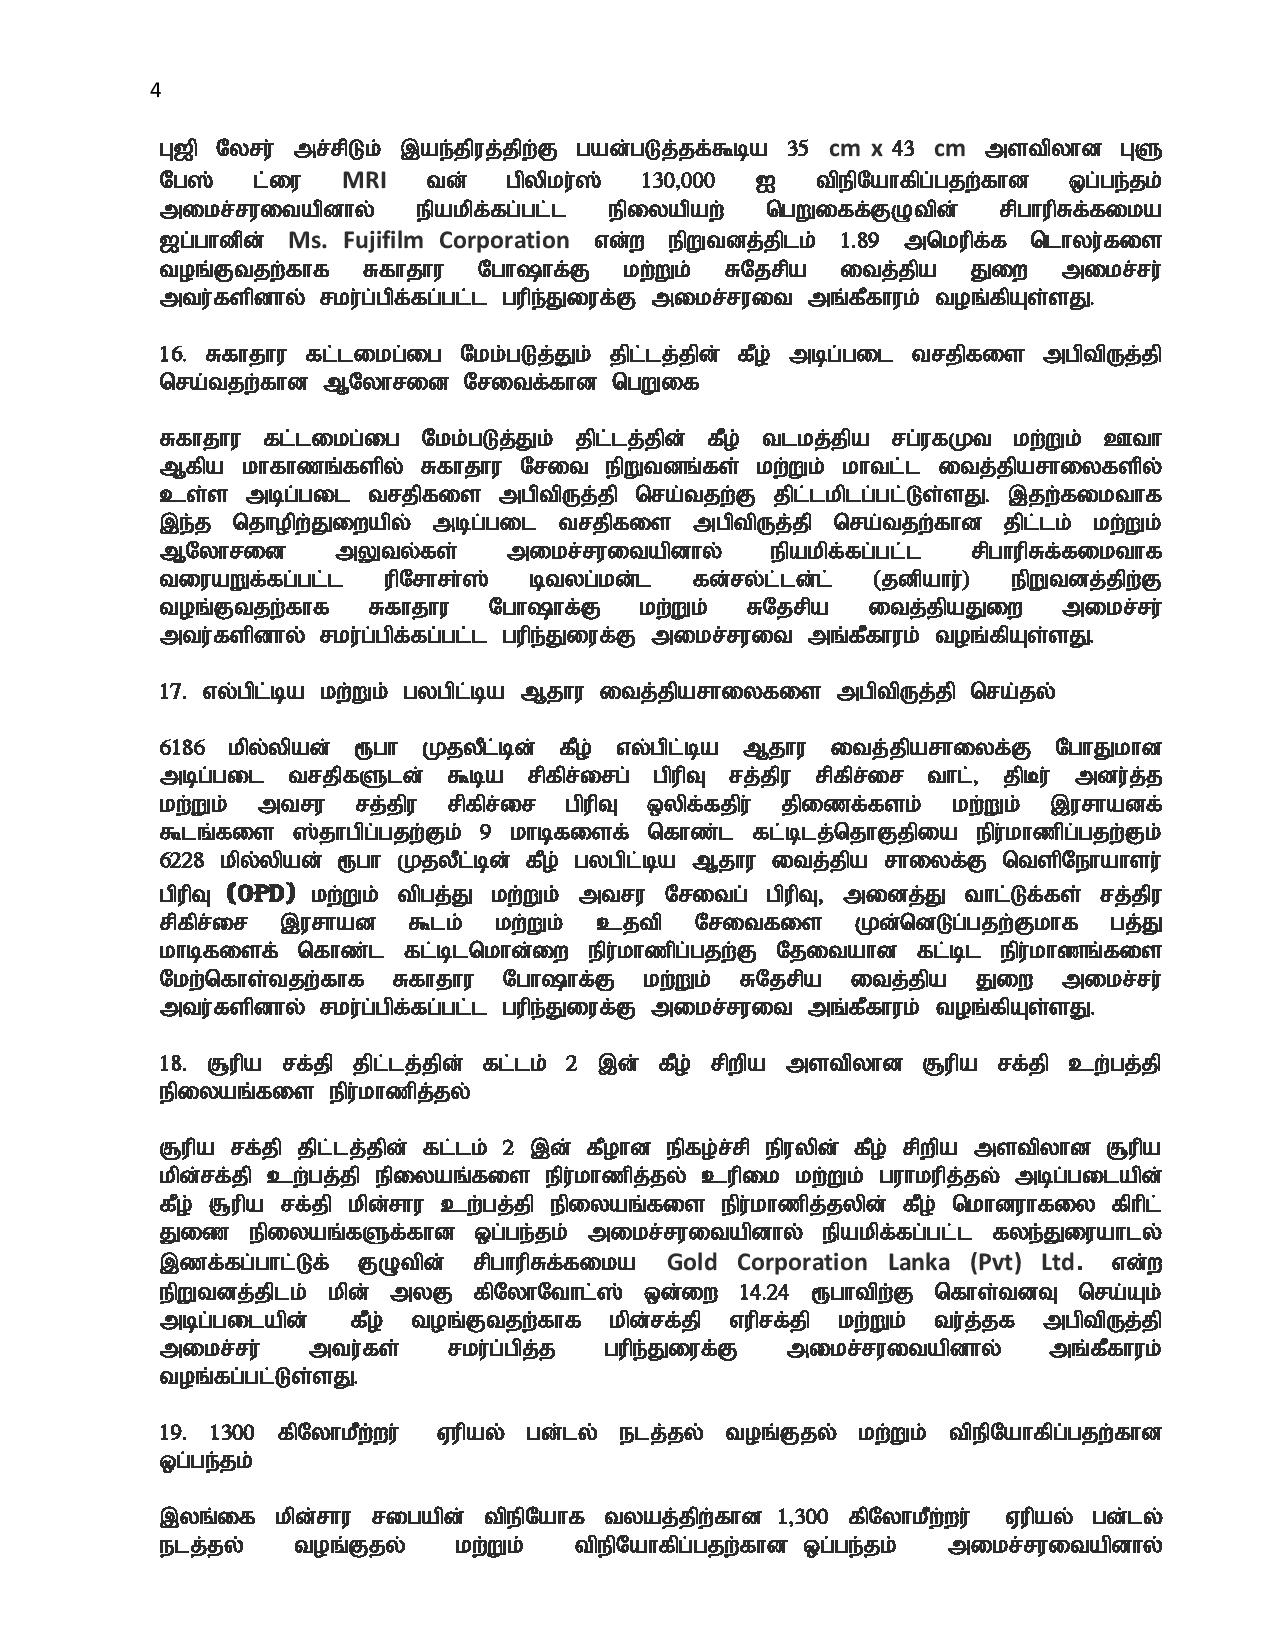 Cabinet Decisions on 05.11.2019 Tamil page 004